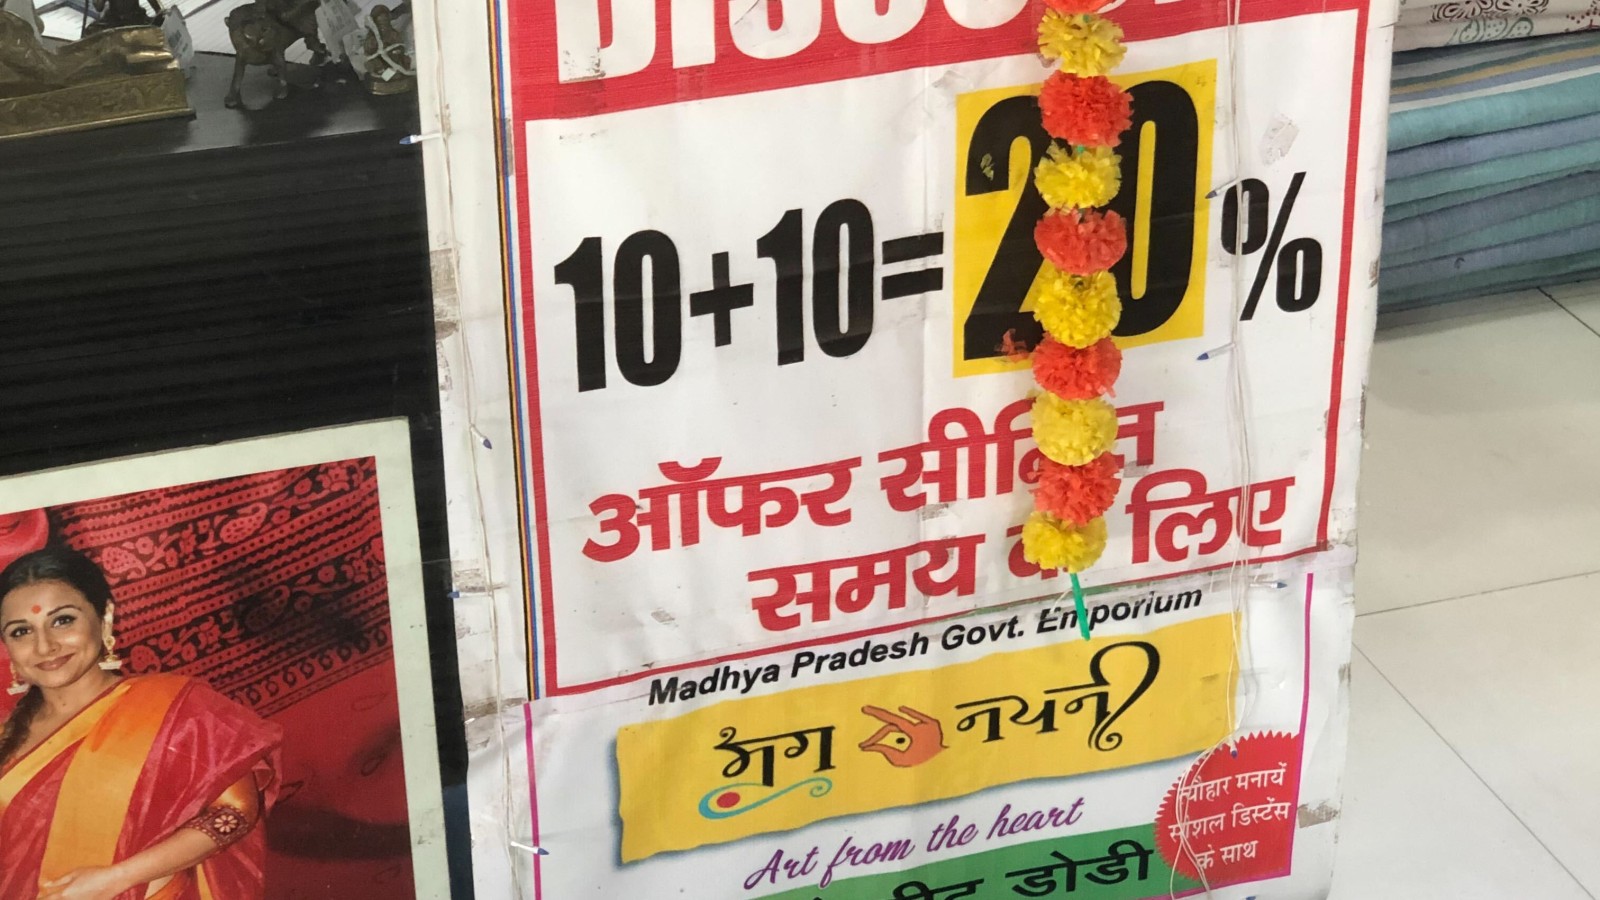 Store in India making a discount calculation error